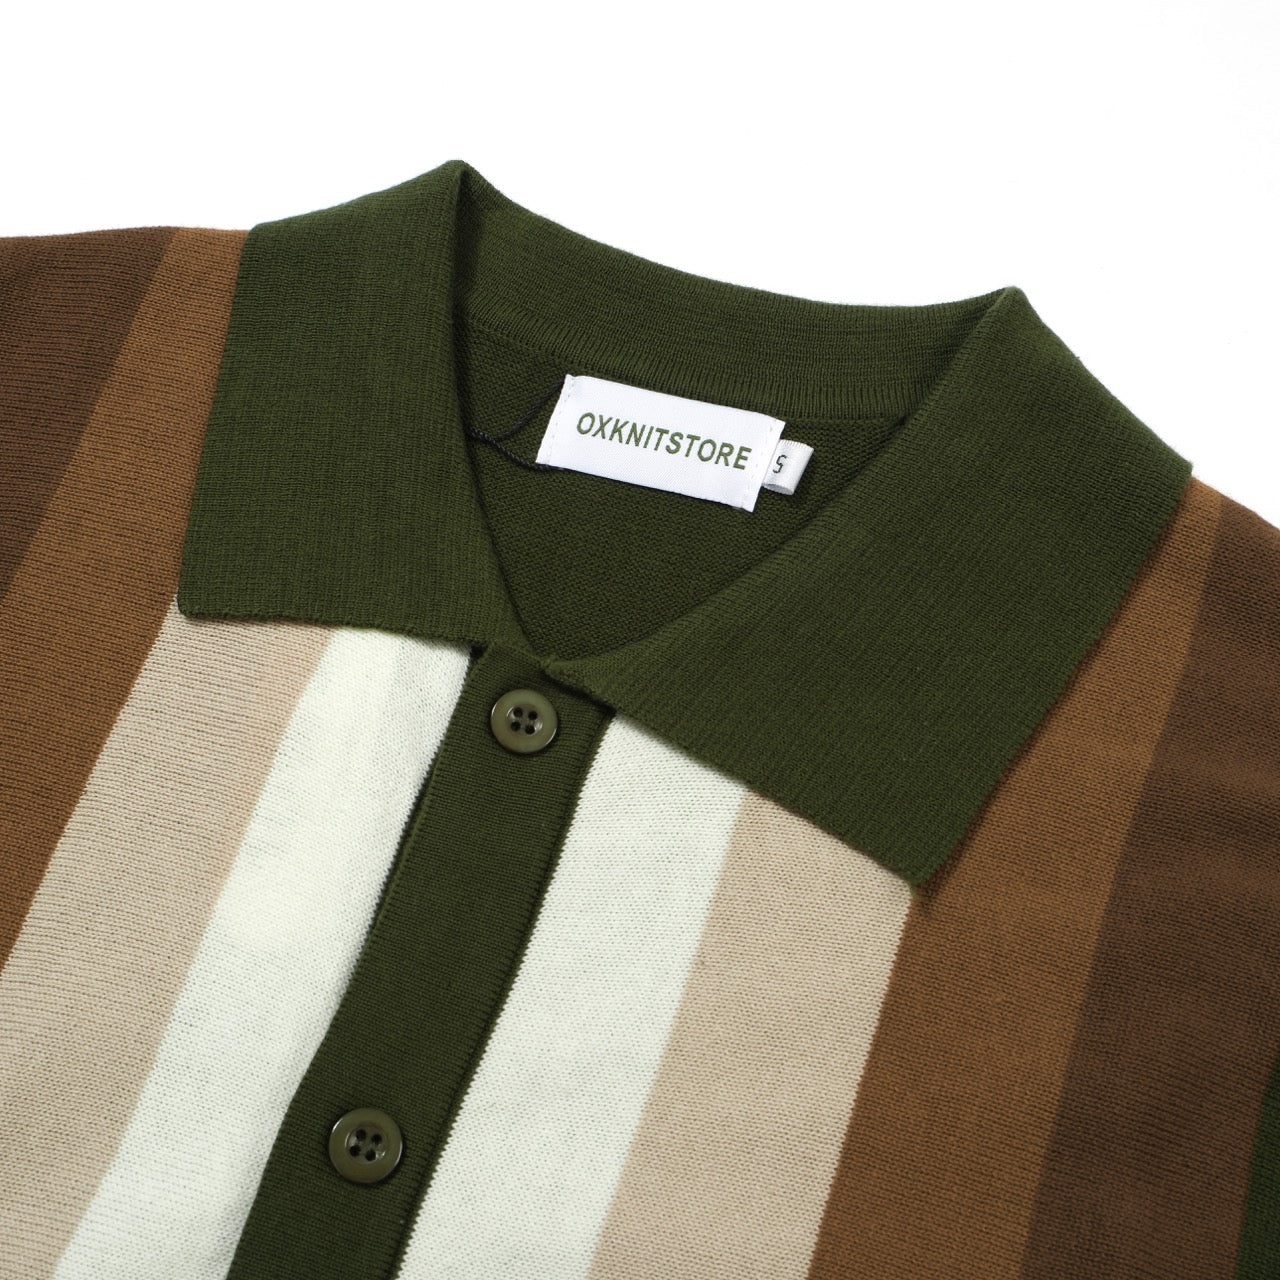 OXKNIT Men Vintage Clothing 1960s Mod Style Casual Brown Classic Button Knit Retro Polo